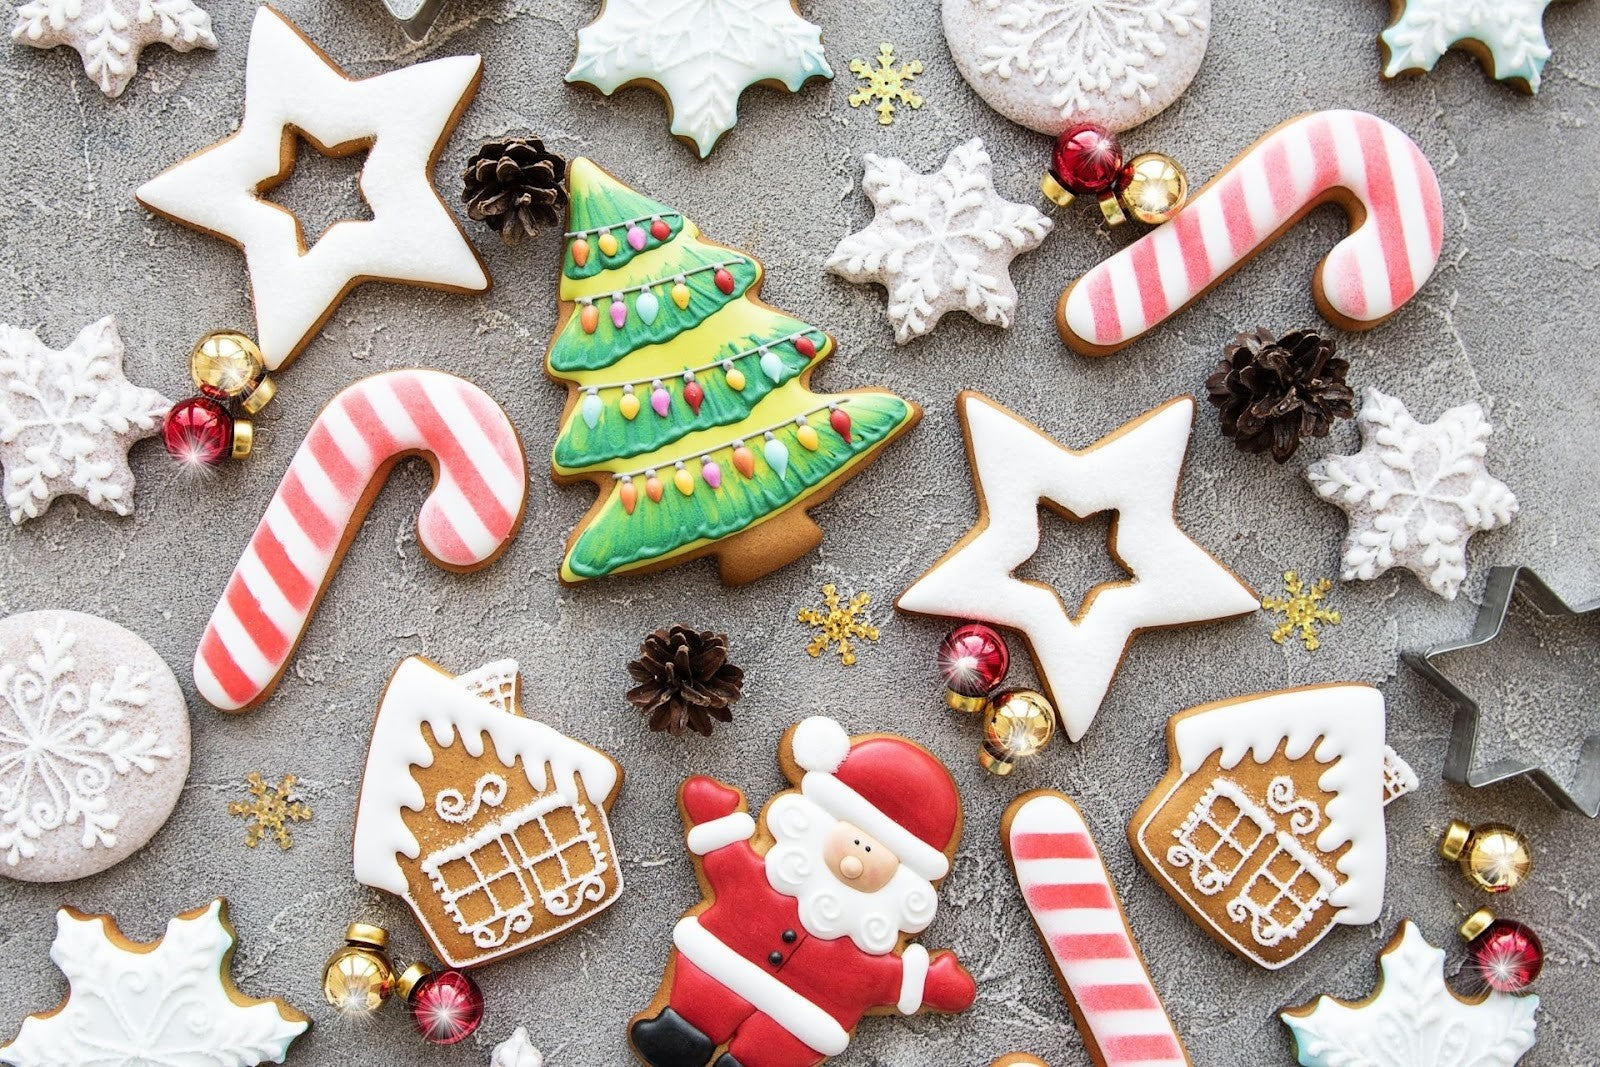 cookies in the shape of Santa Claus, candy canes, stars, and gingerbread houses spread out on a table